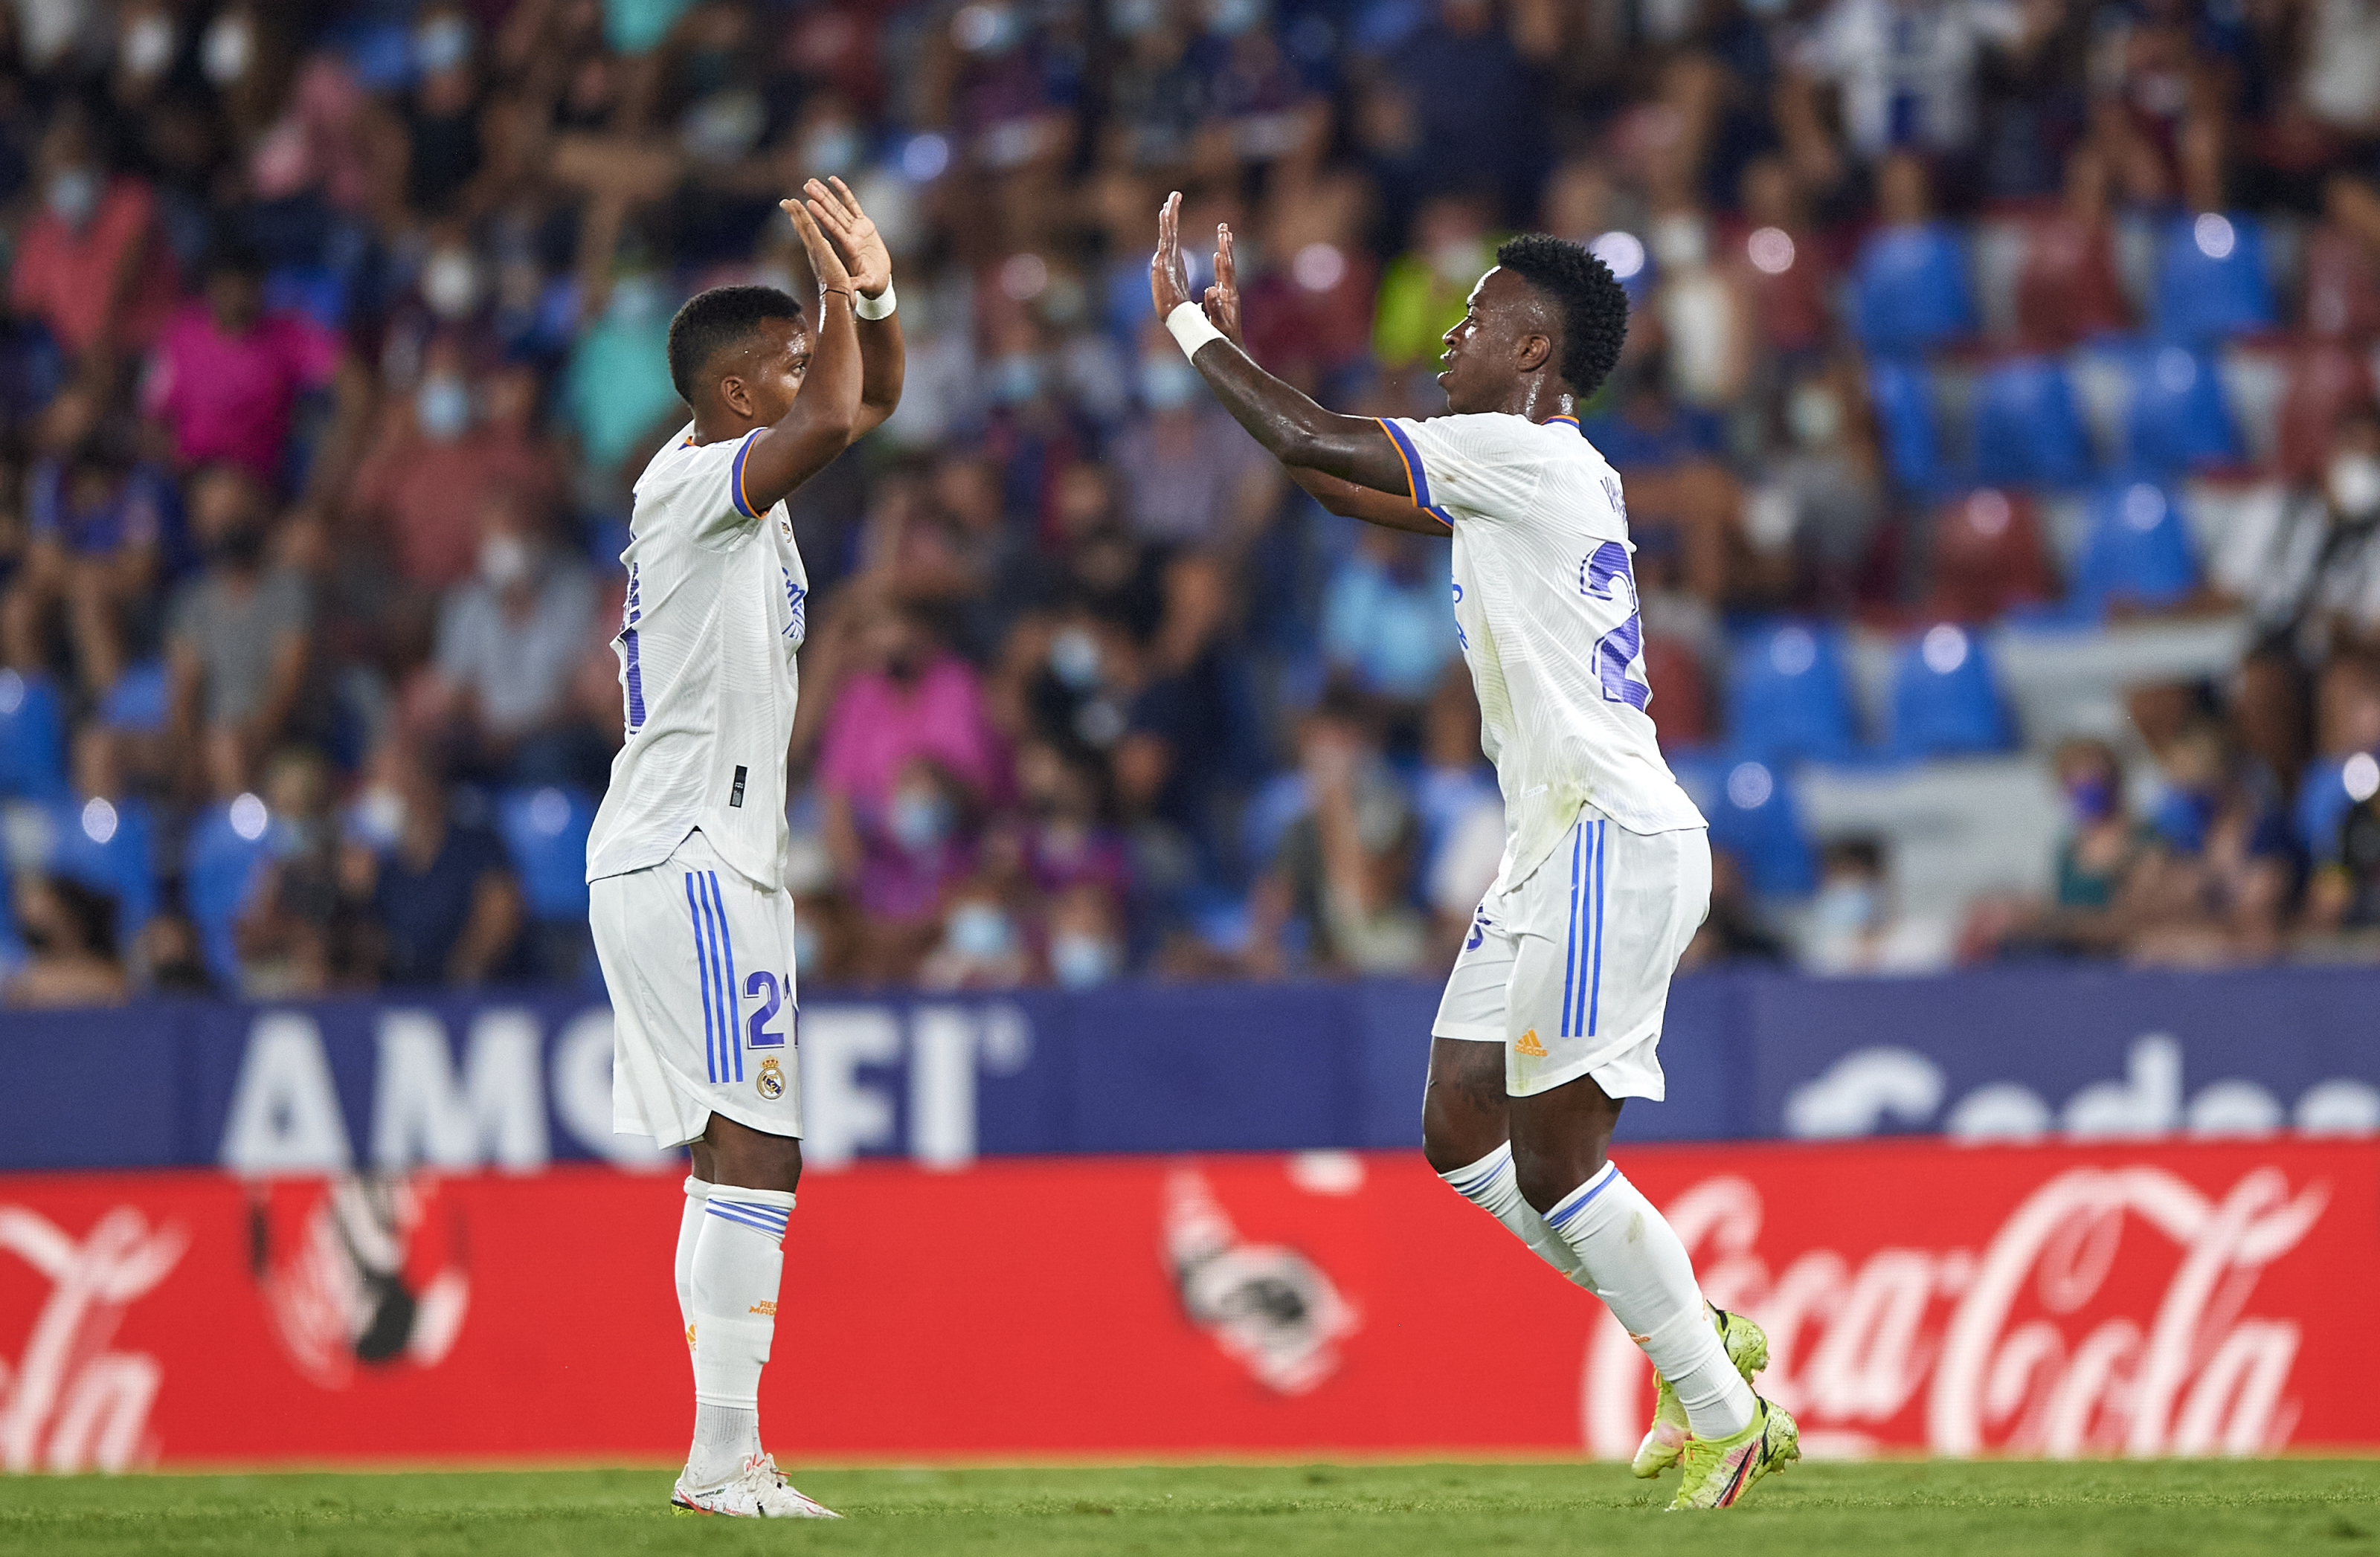 Real Madrid can count on Vinicius Jr., Rodrygo Goes to meet the standard